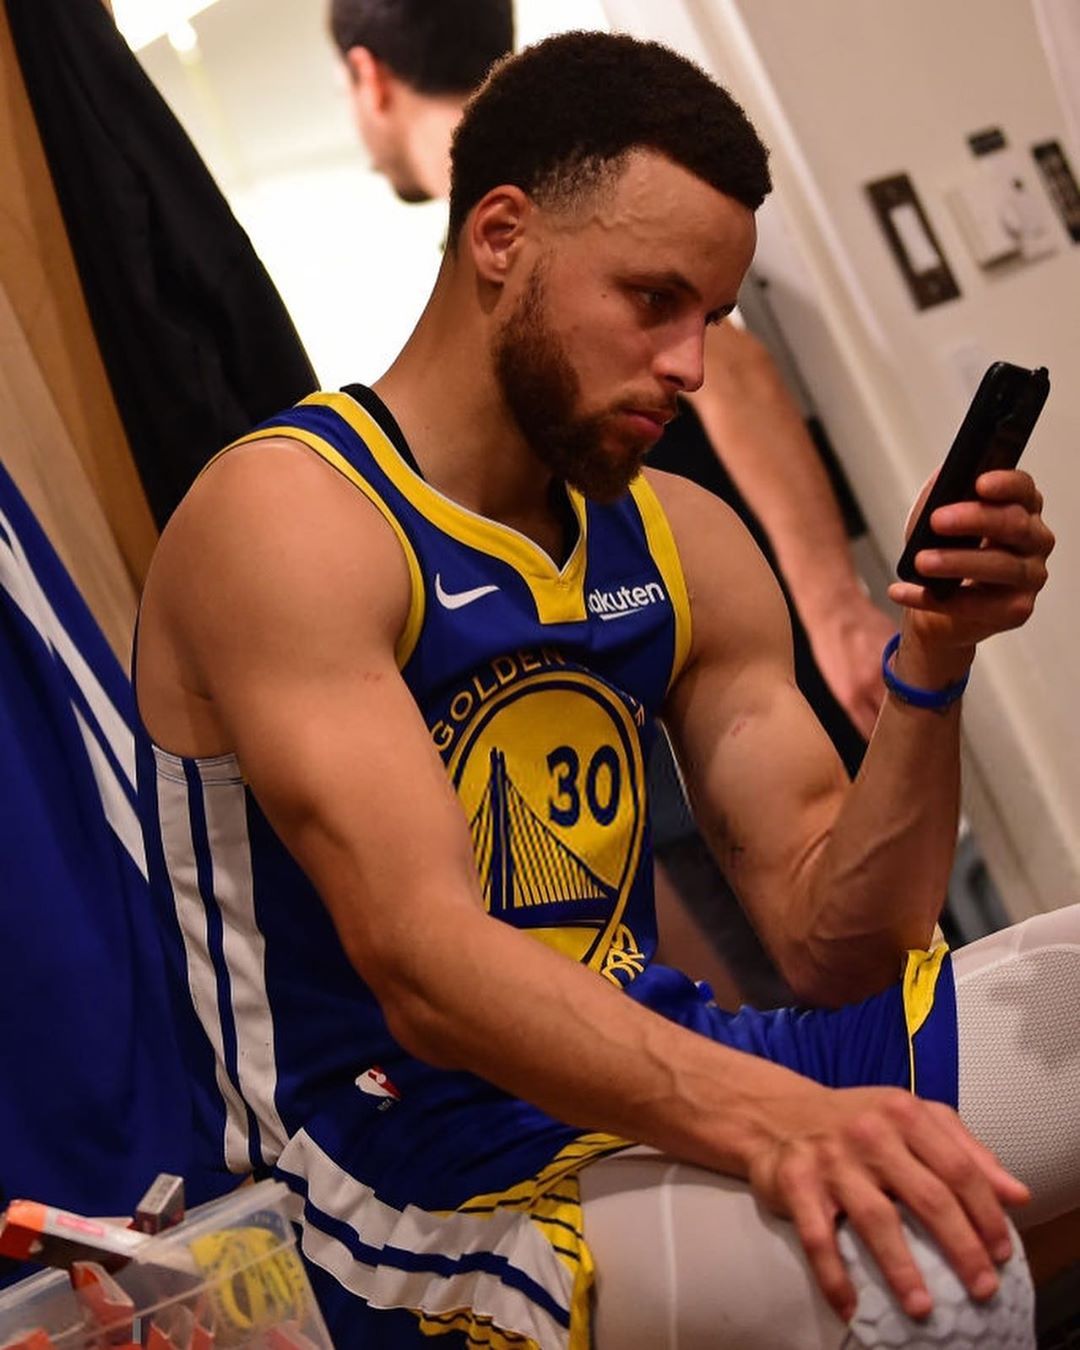 NBA Stephen Curry Phone Number and Residence Address